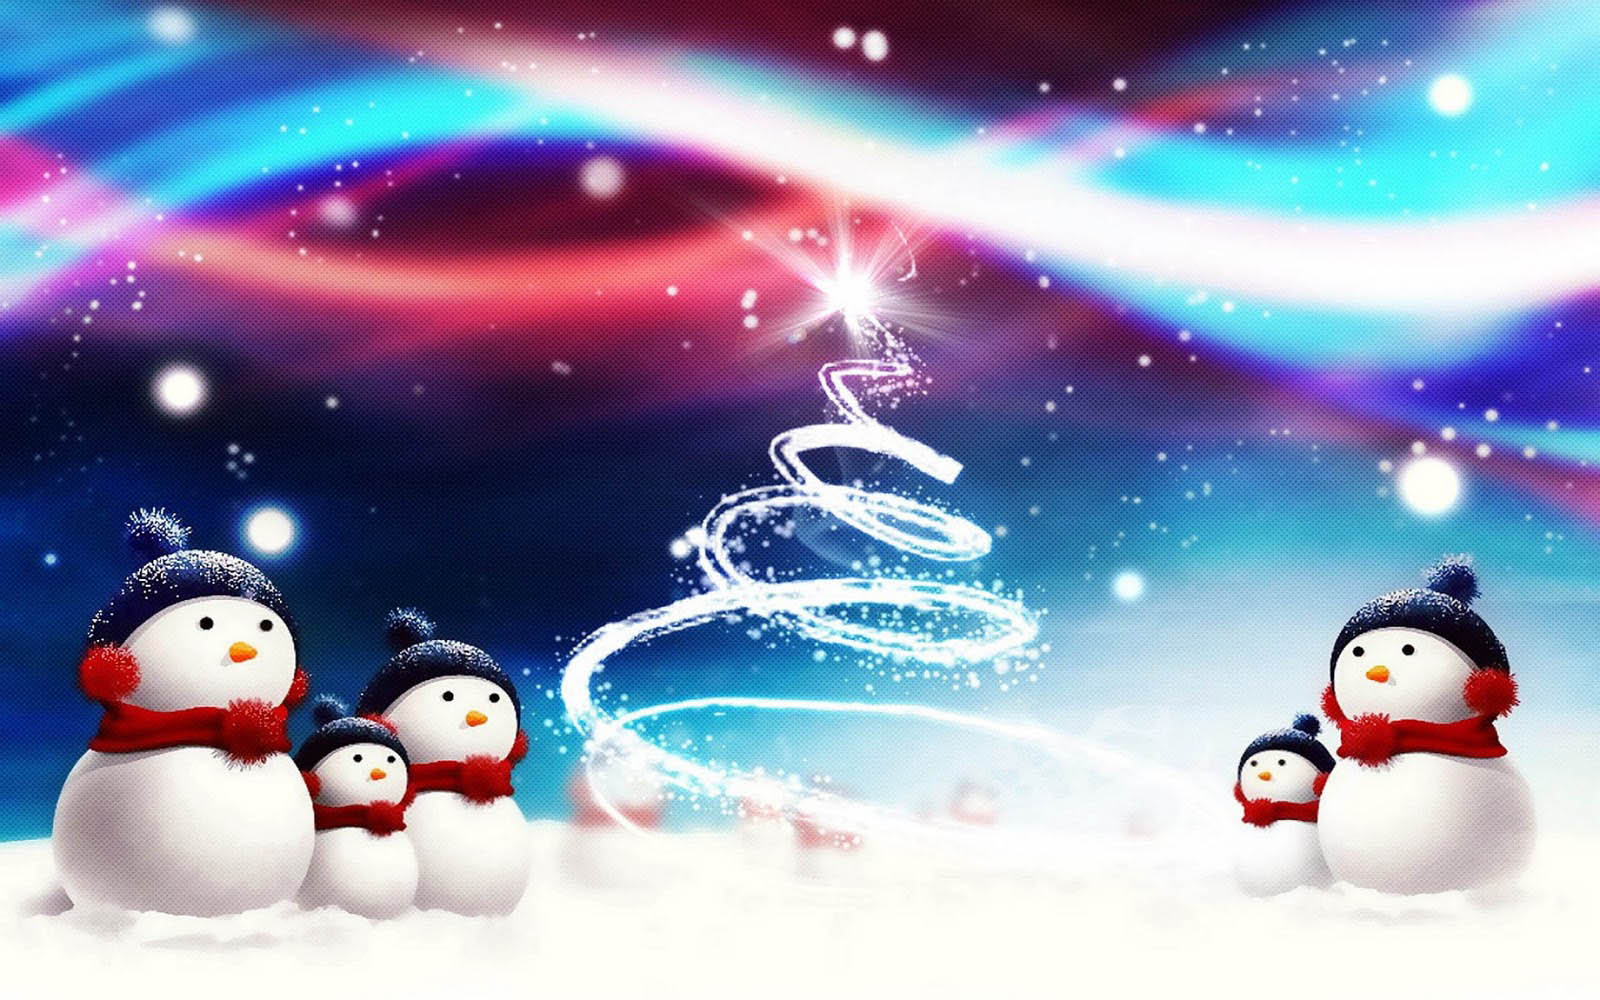 Cute Christmas Snowman Wallpaper For Desktop Daily Background In